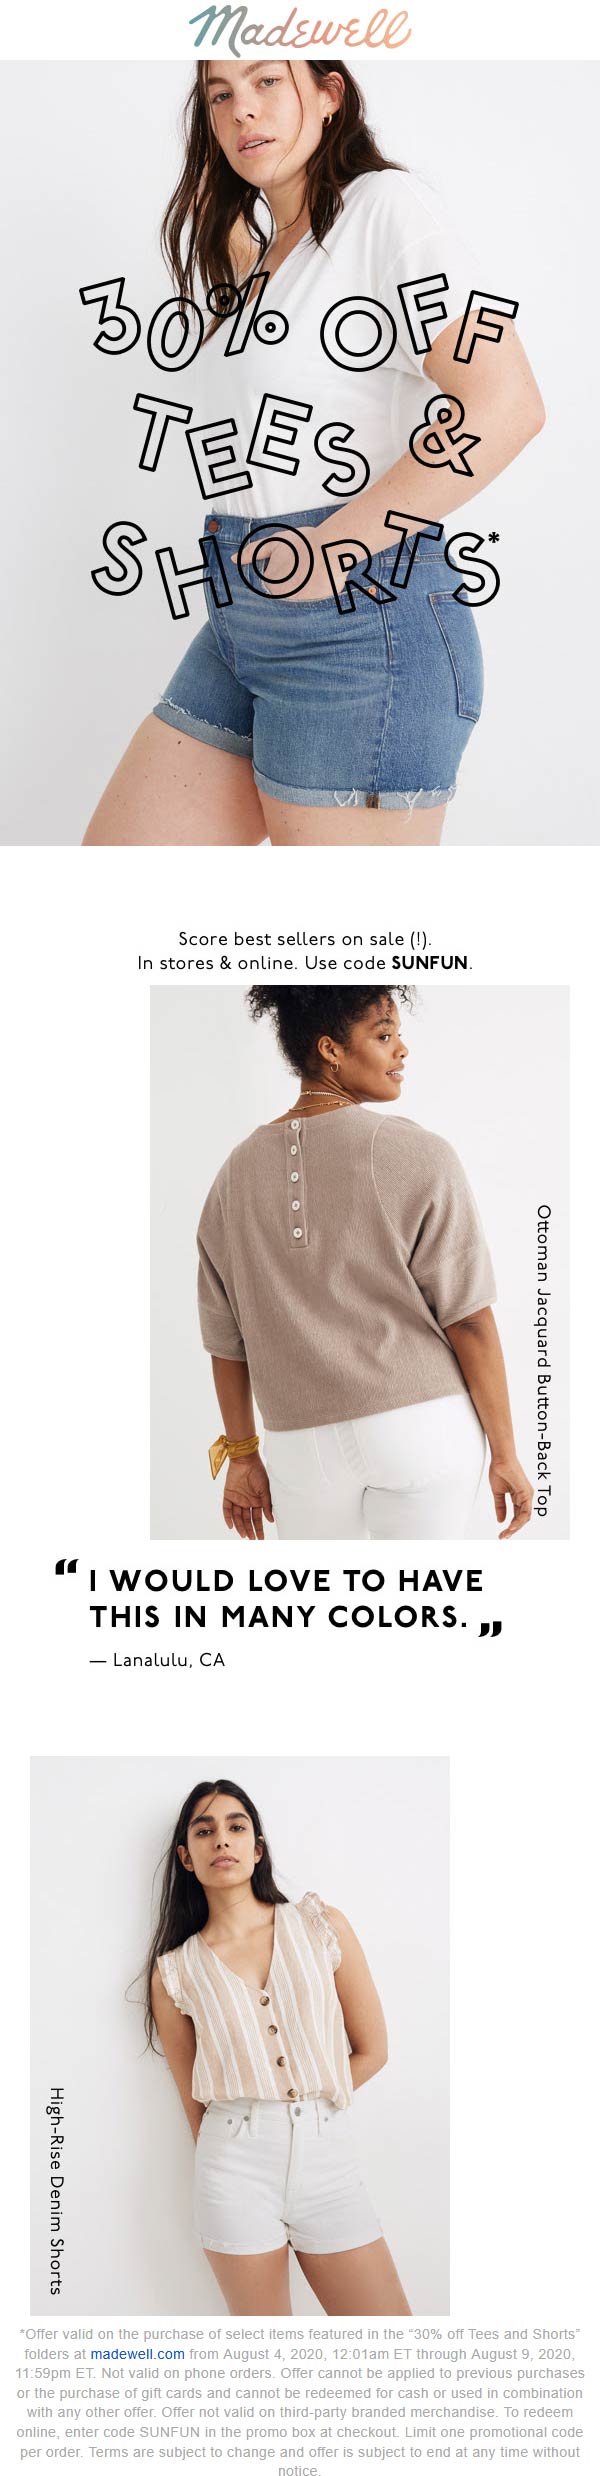 Madewell stores Coupon  30% off tees & shorts at Madewell via promo code SUNFUN #madewell 